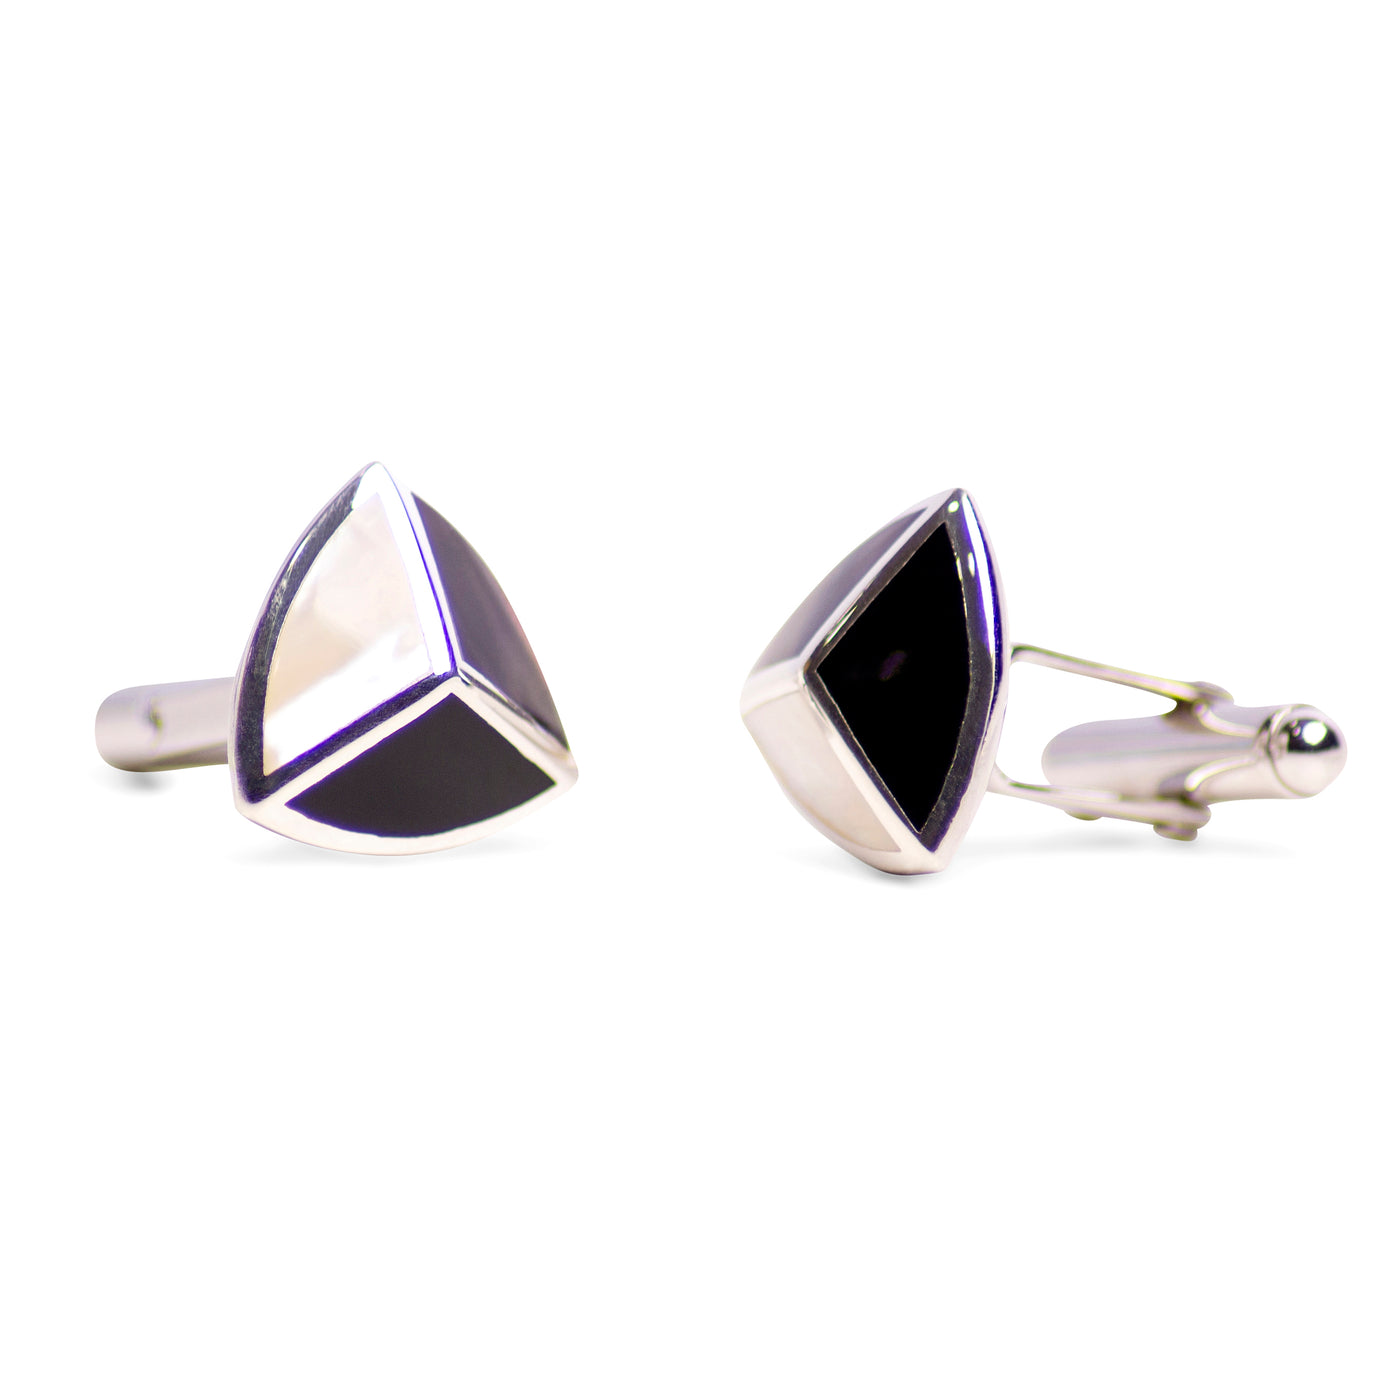 Mother of Pearl, Abalone, & Onyx Cufflinks